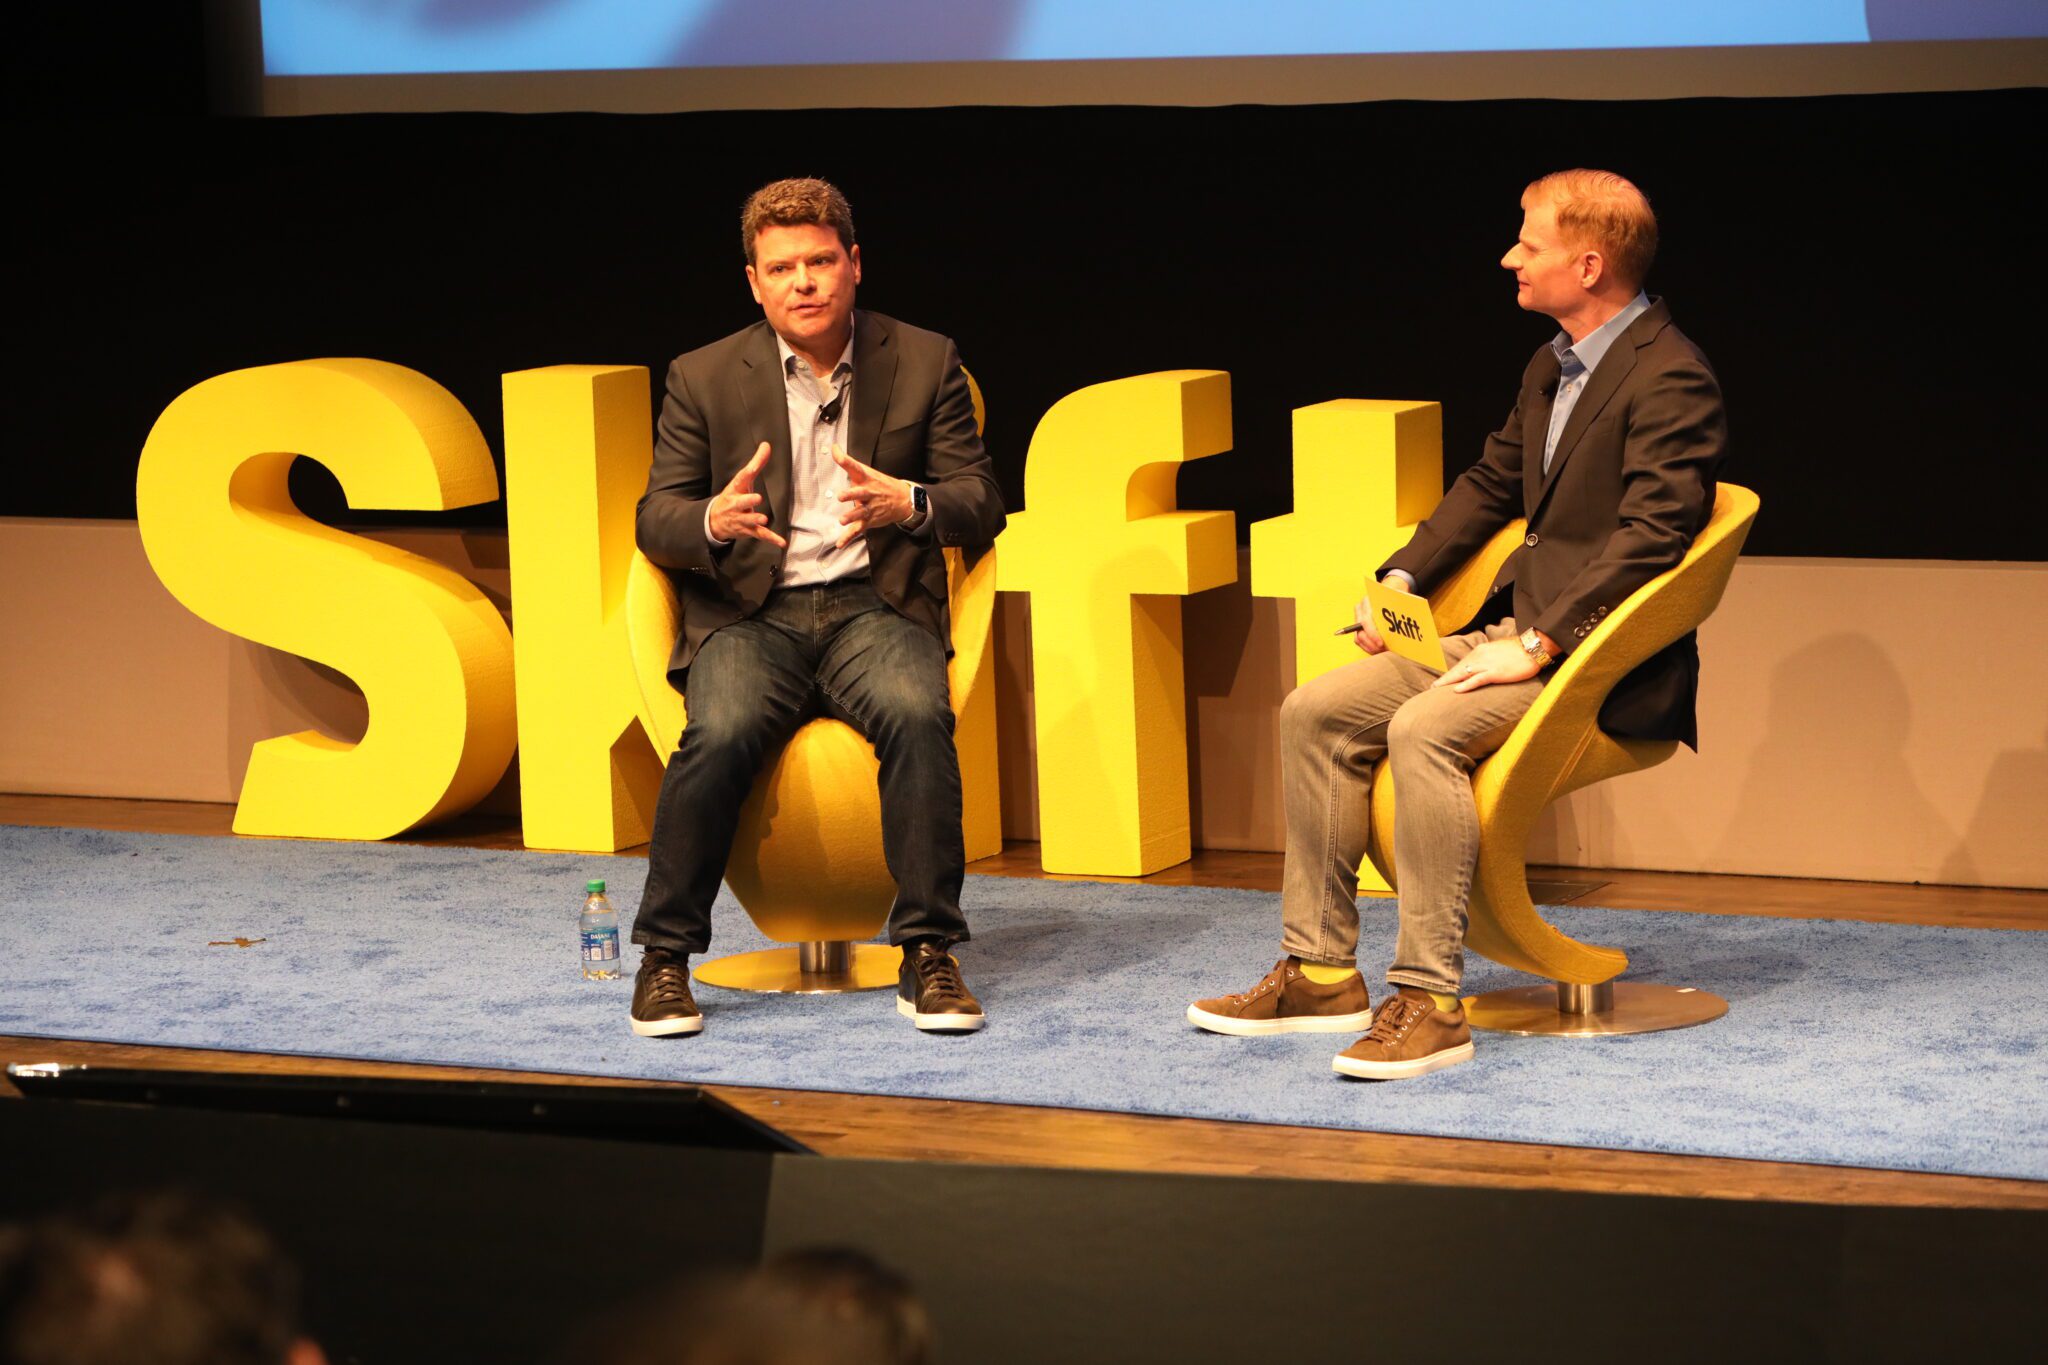  Drew Pinto, executive vice president and chief revenue and technology officer at Marriott at Skift’s Data + AI Summit in New York.